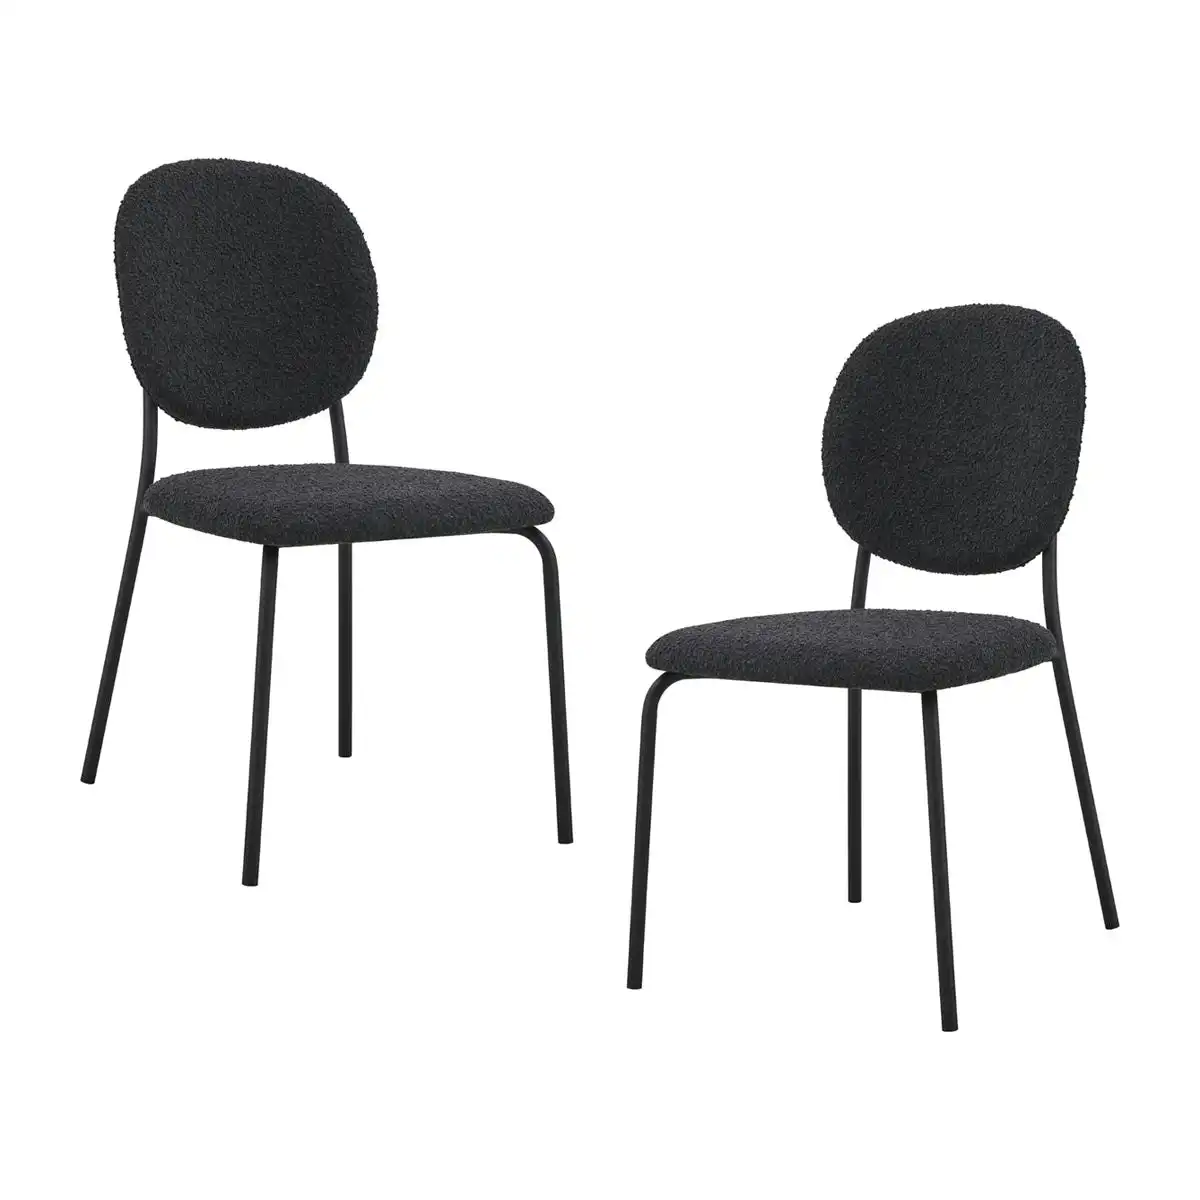 Margot Boucle Dining Chair Set of 2 (Black, Charcoal)